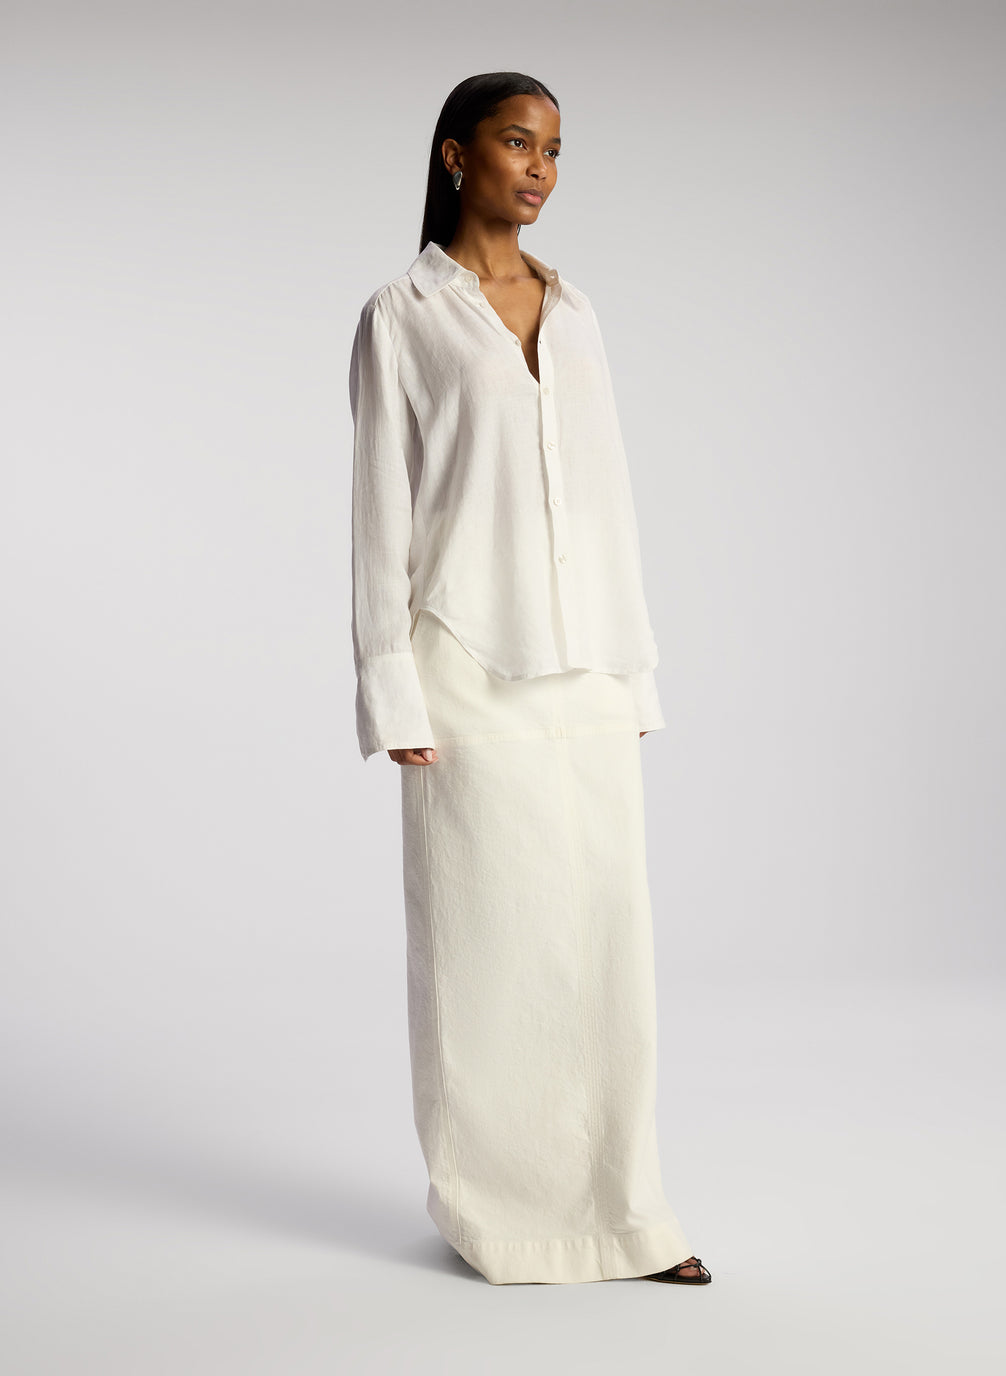 side view woman wearing white button down linen shirt and white maxi skirt